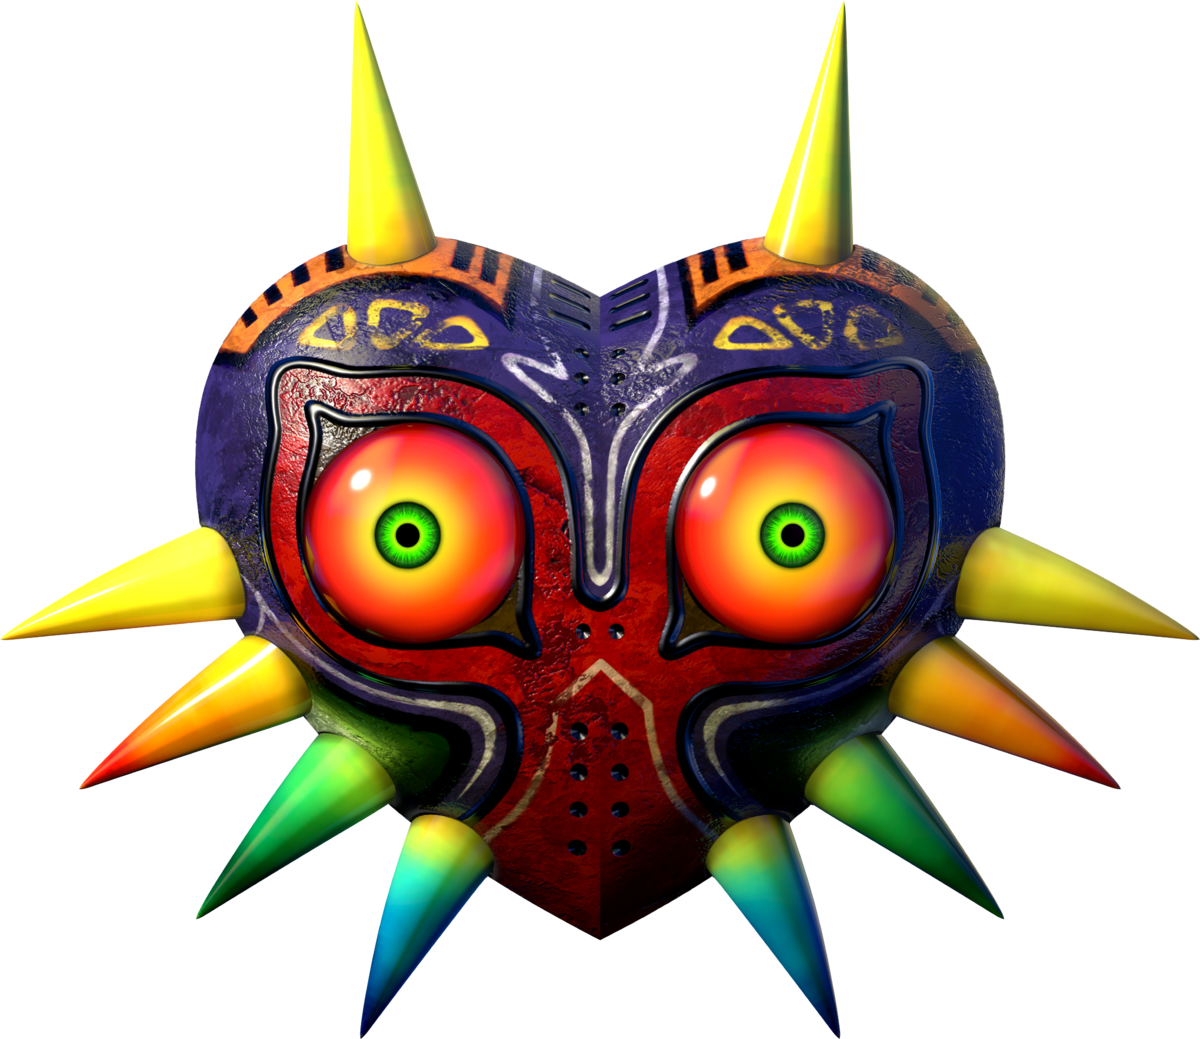 Do You Need All The Masks To Beat Majora S Mask